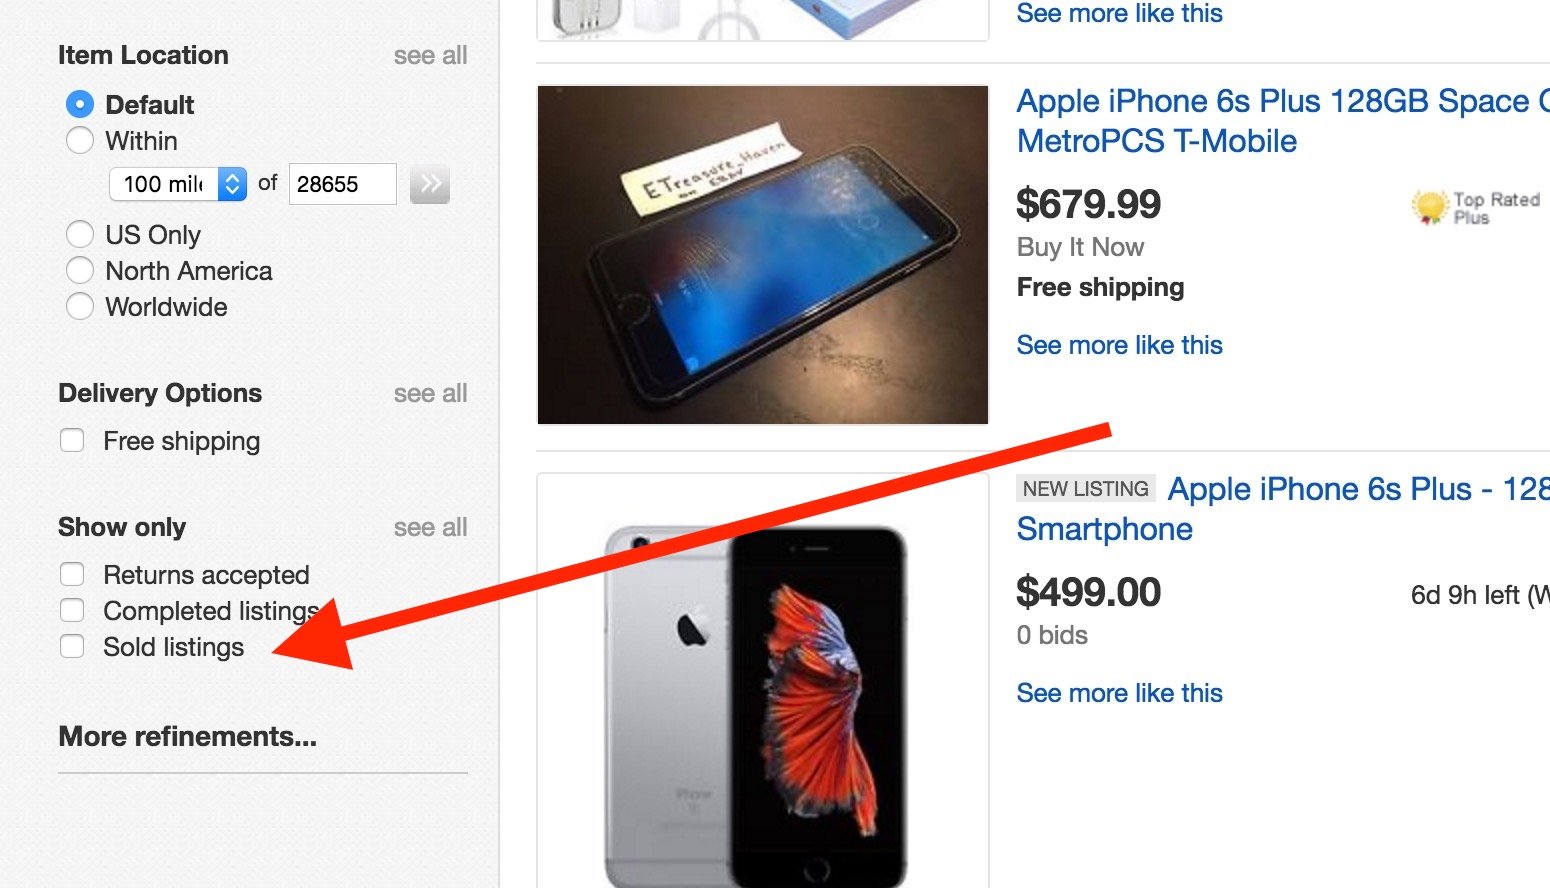 sell your old iphone on ebay